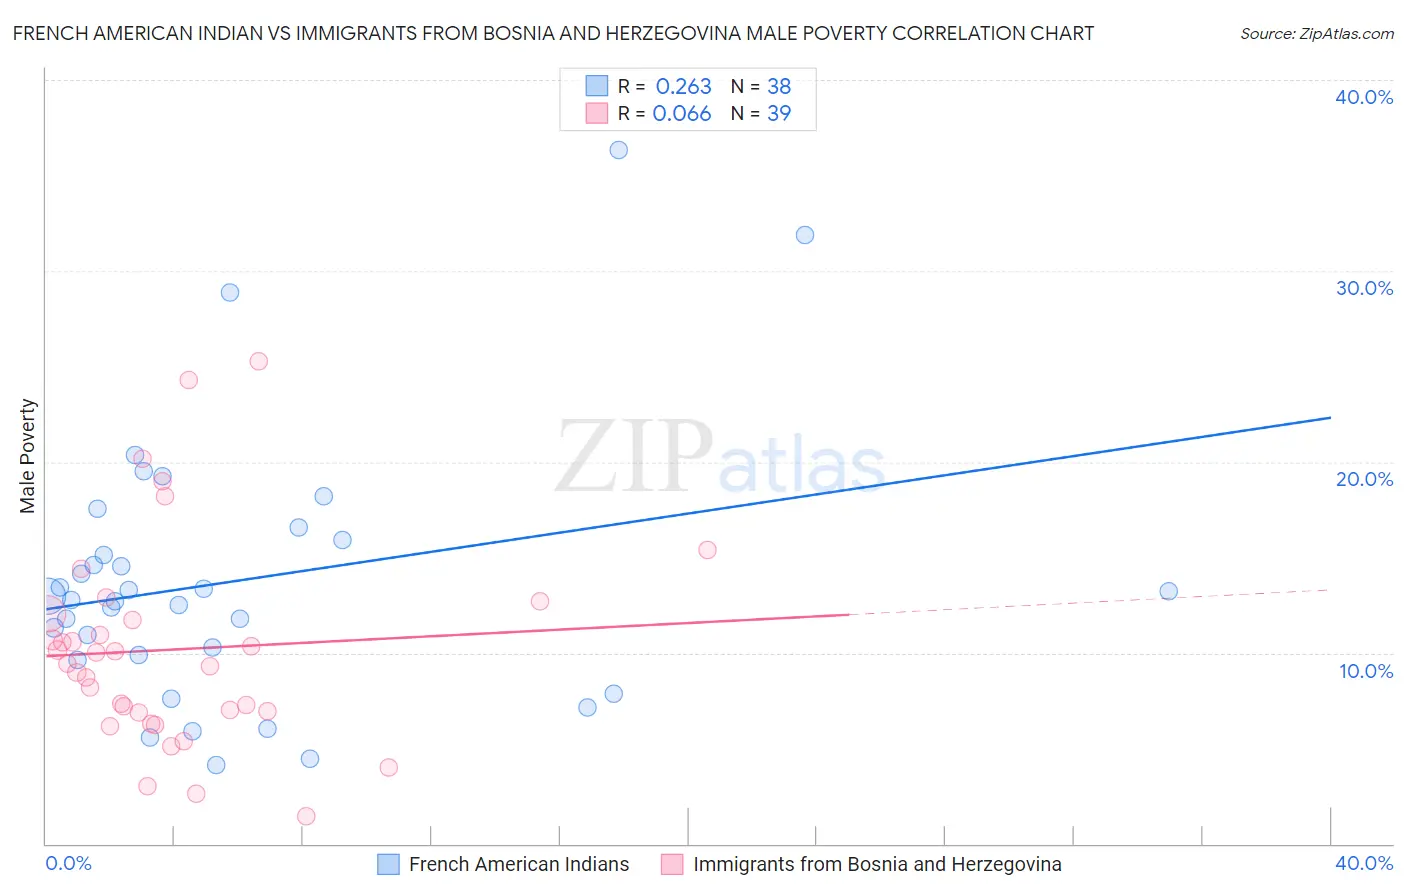 French American Indian vs Immigrants from Bosnia and Herzegovina Male Poverty